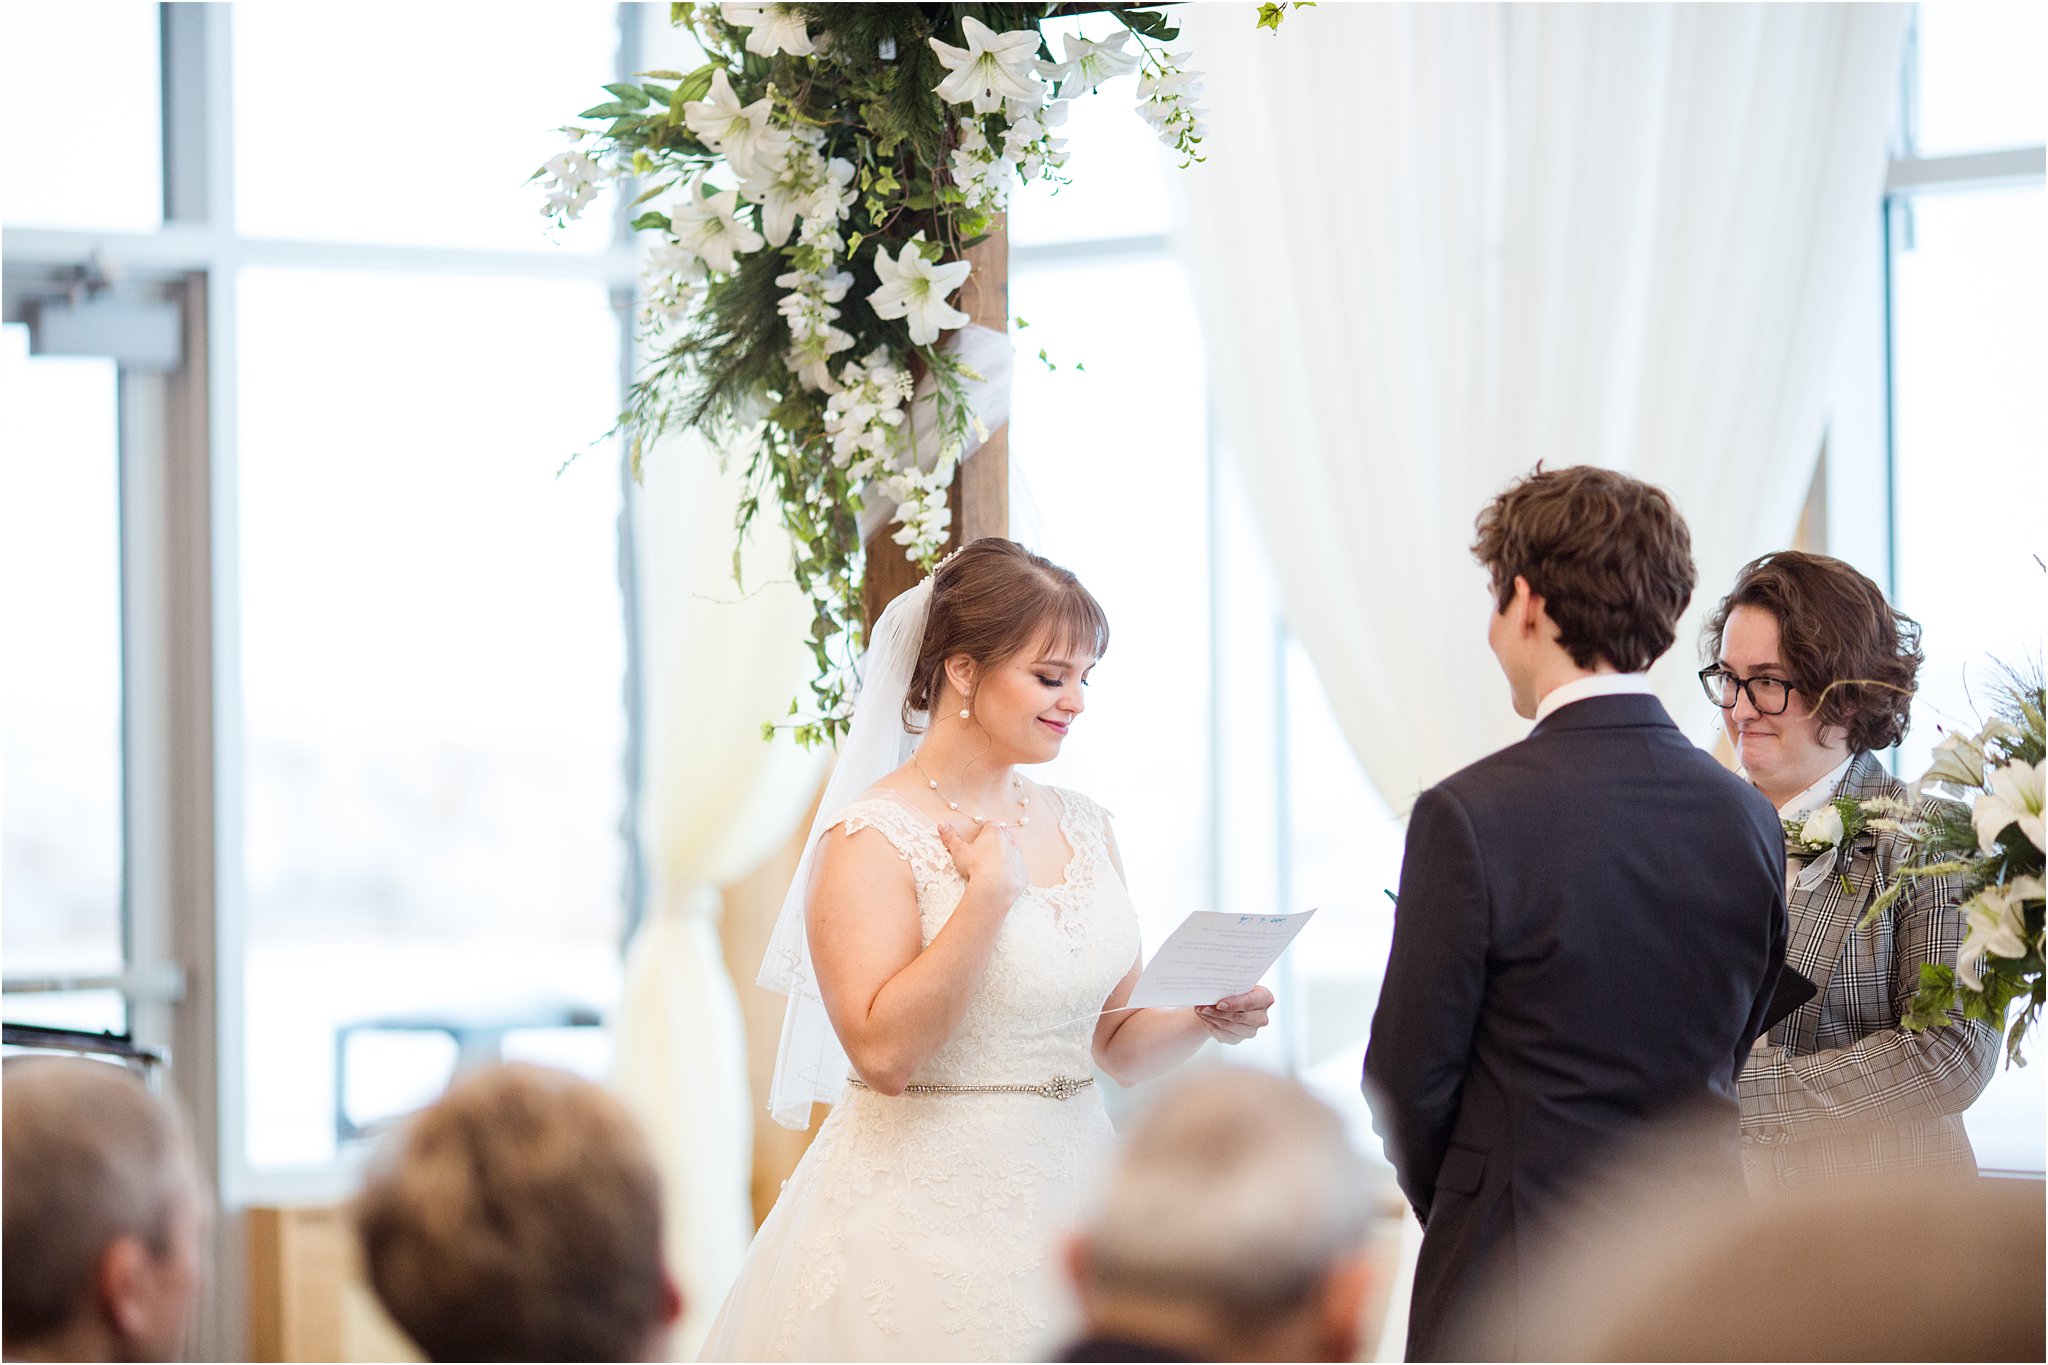 Emotional Bride reading her vows to her groom